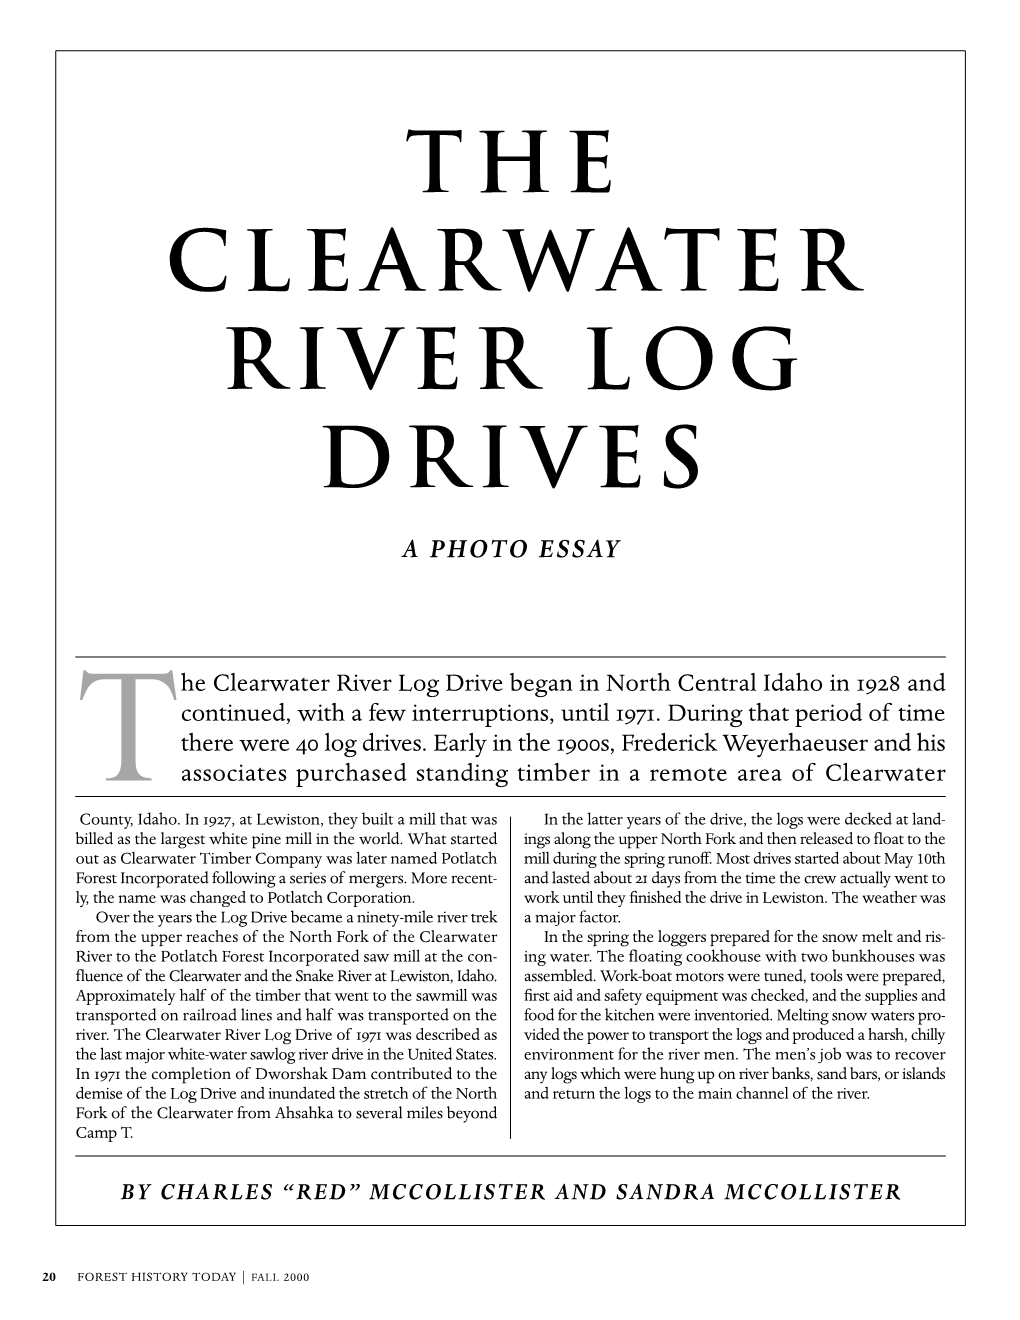 The Clearwater River Log Drives